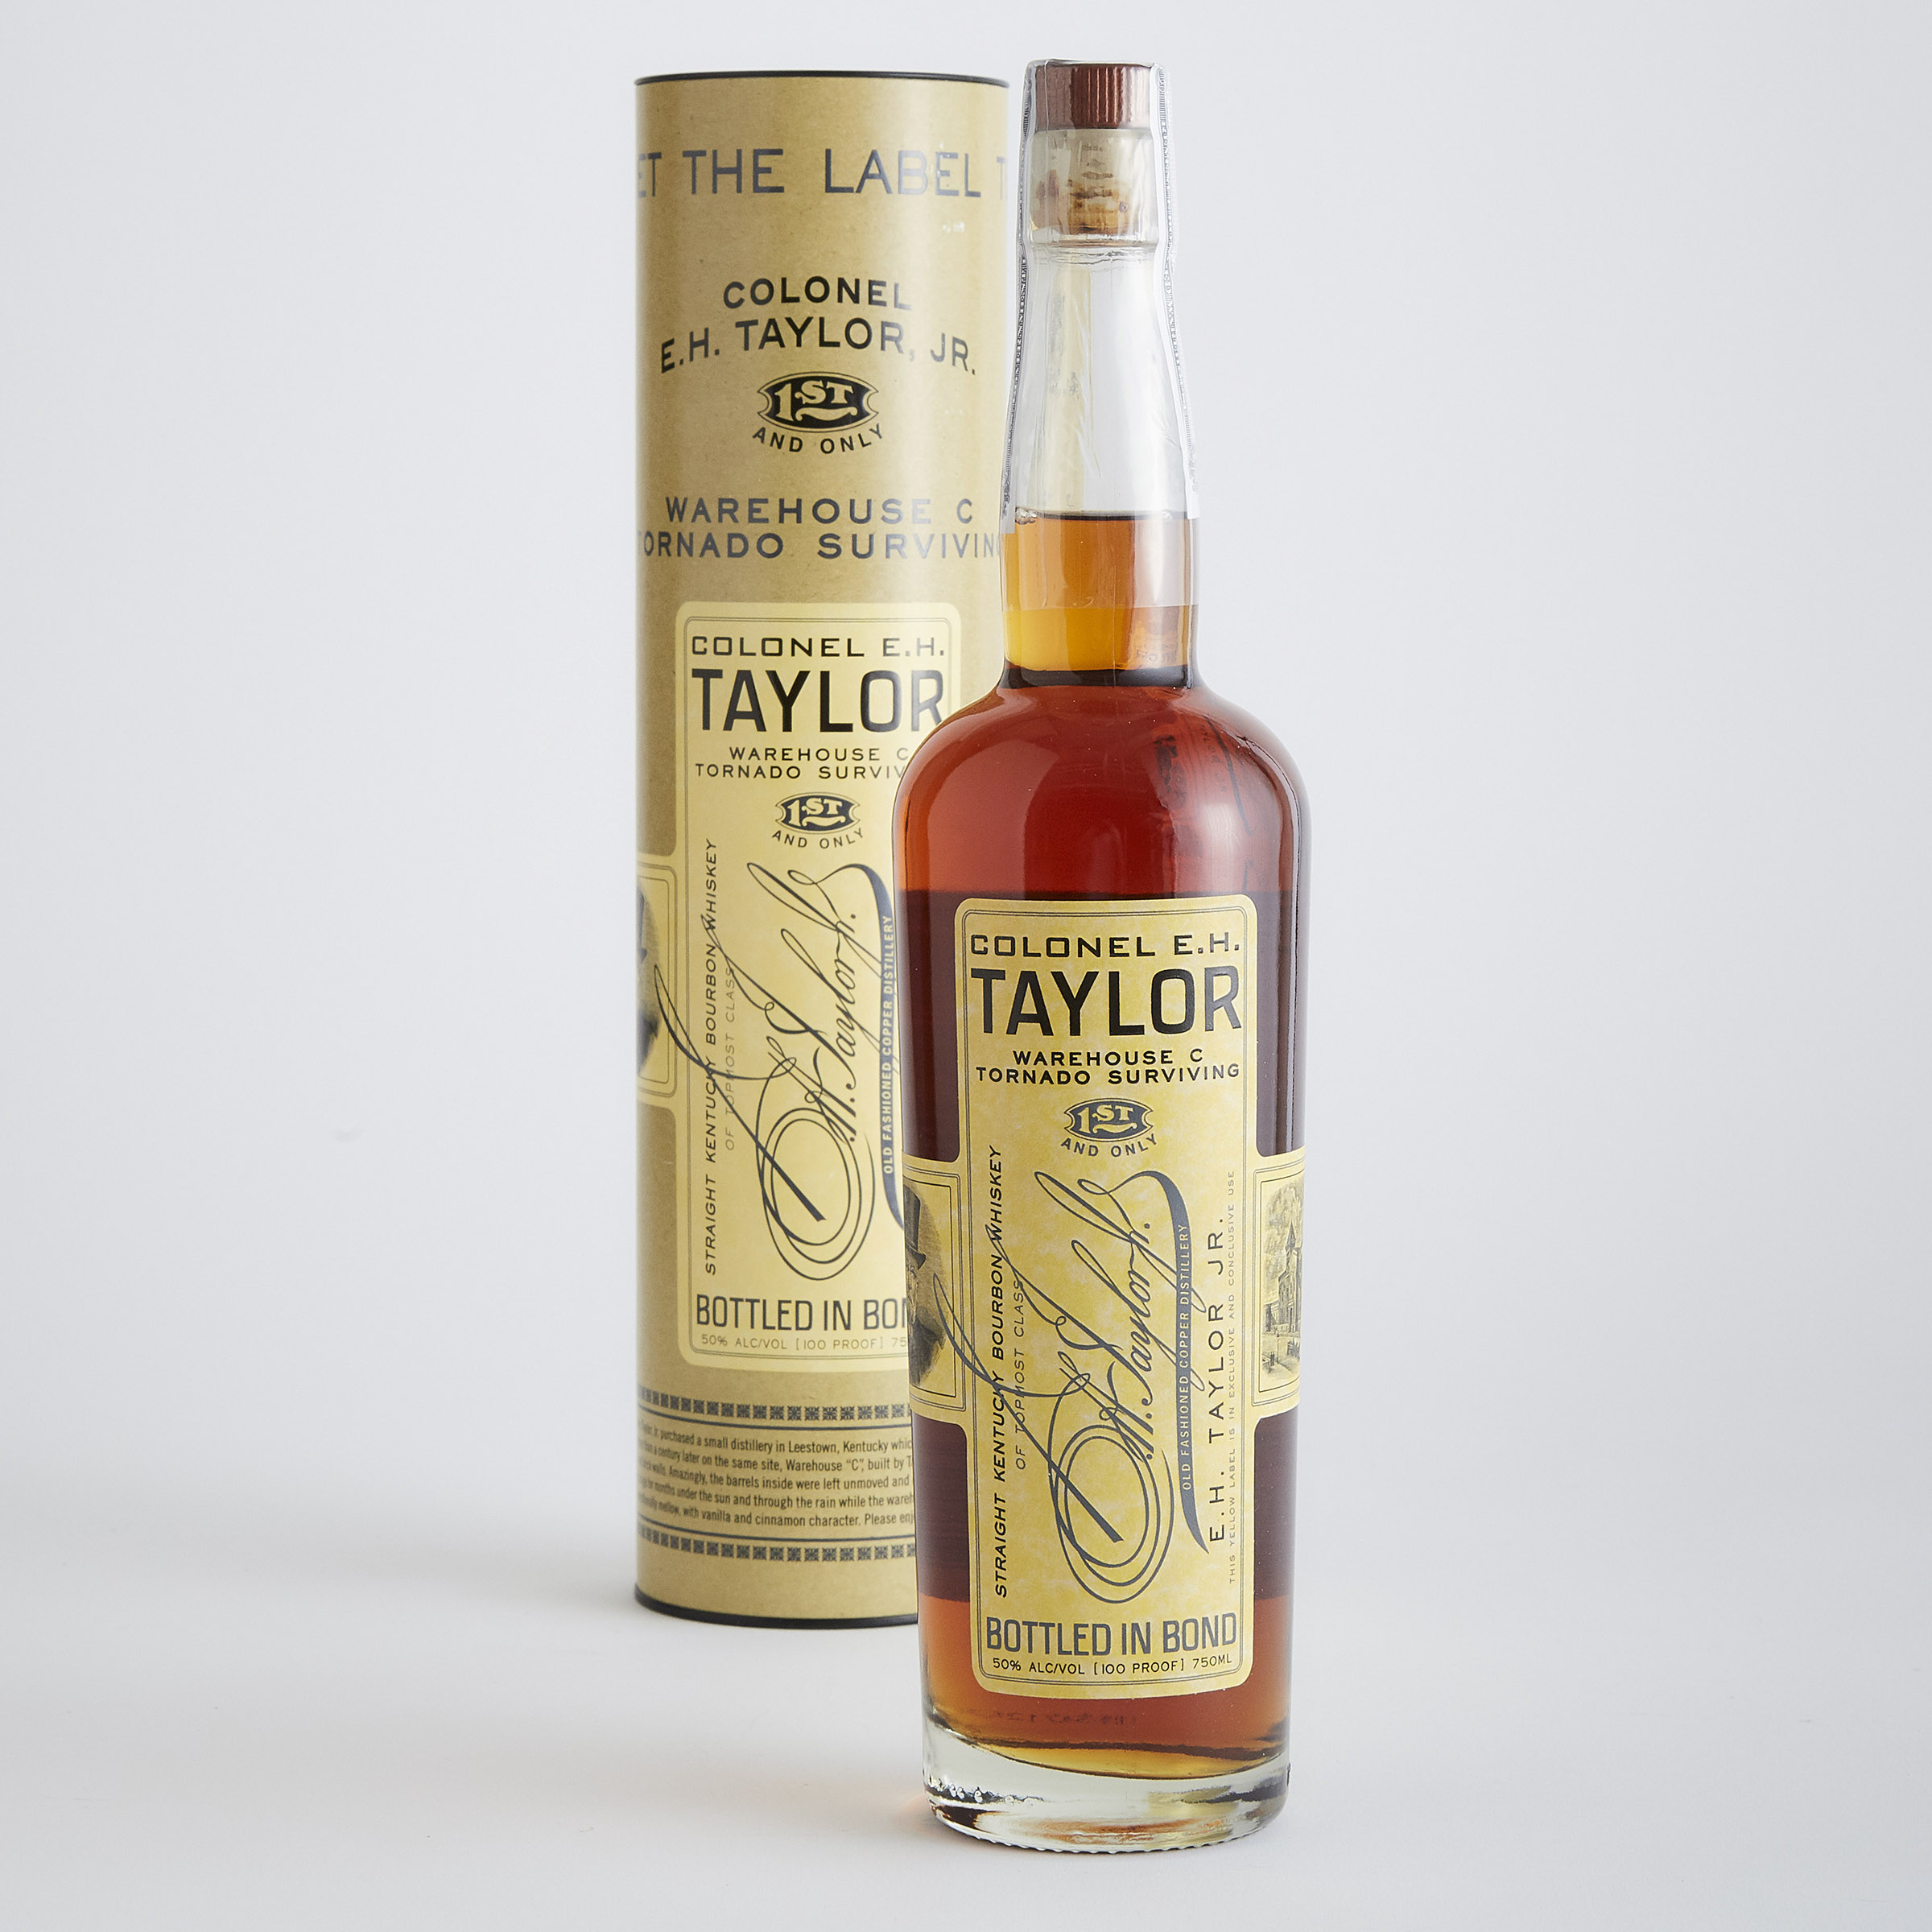 COLONEL E.H.TAYLOR JR.STRAIGHT KENTUCKY BOURBON WHISKEY NAS (ONE 750 ML)